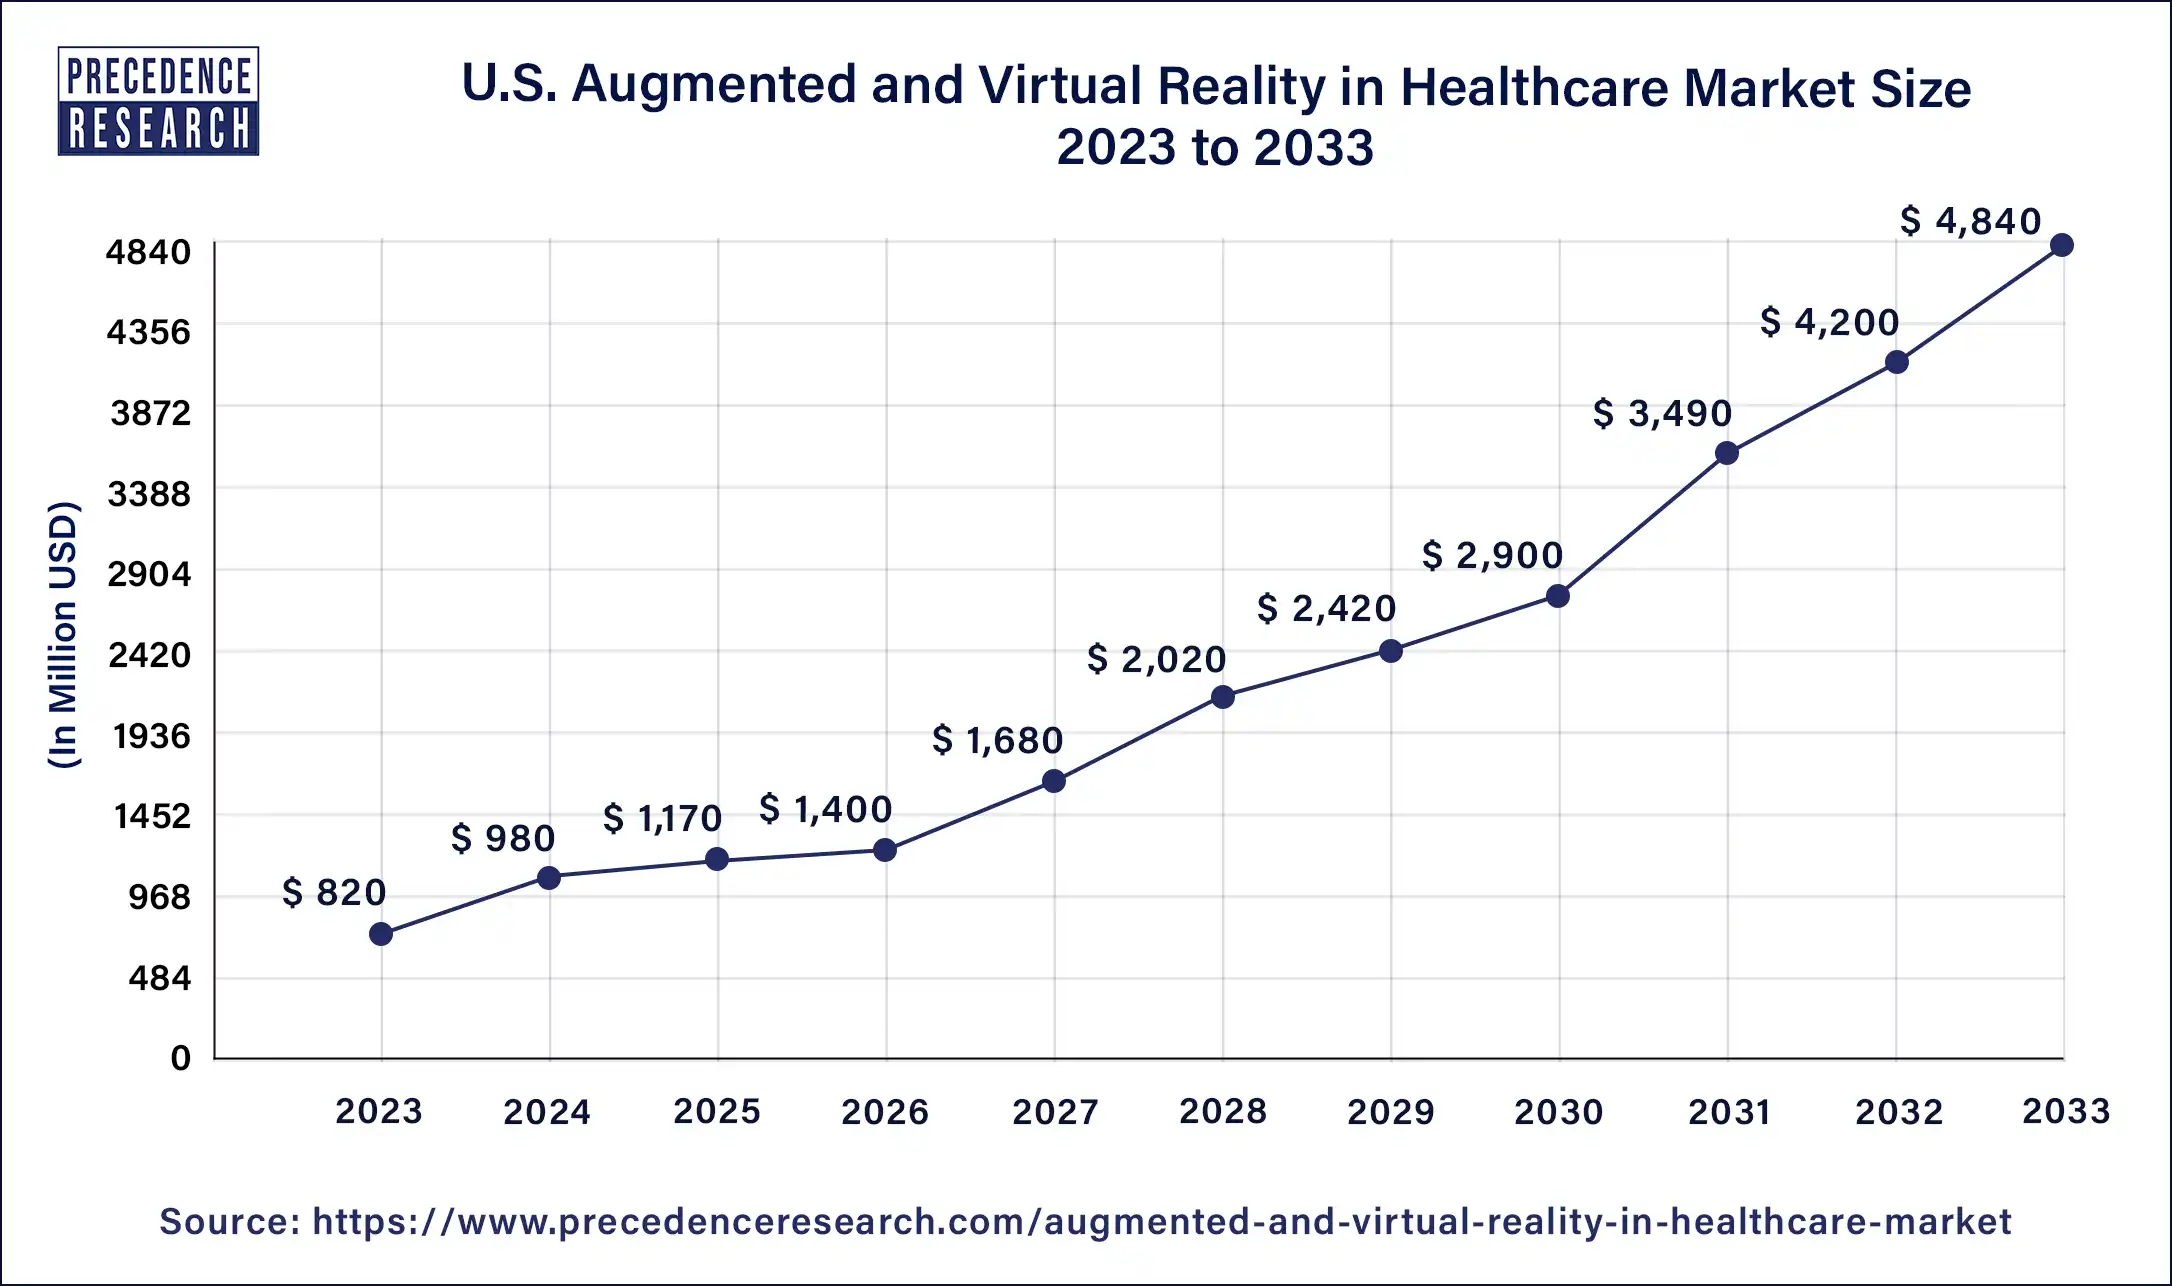 U.S. Augmented and Virtual Reality in Healthcare Market Size 2024 to 2033